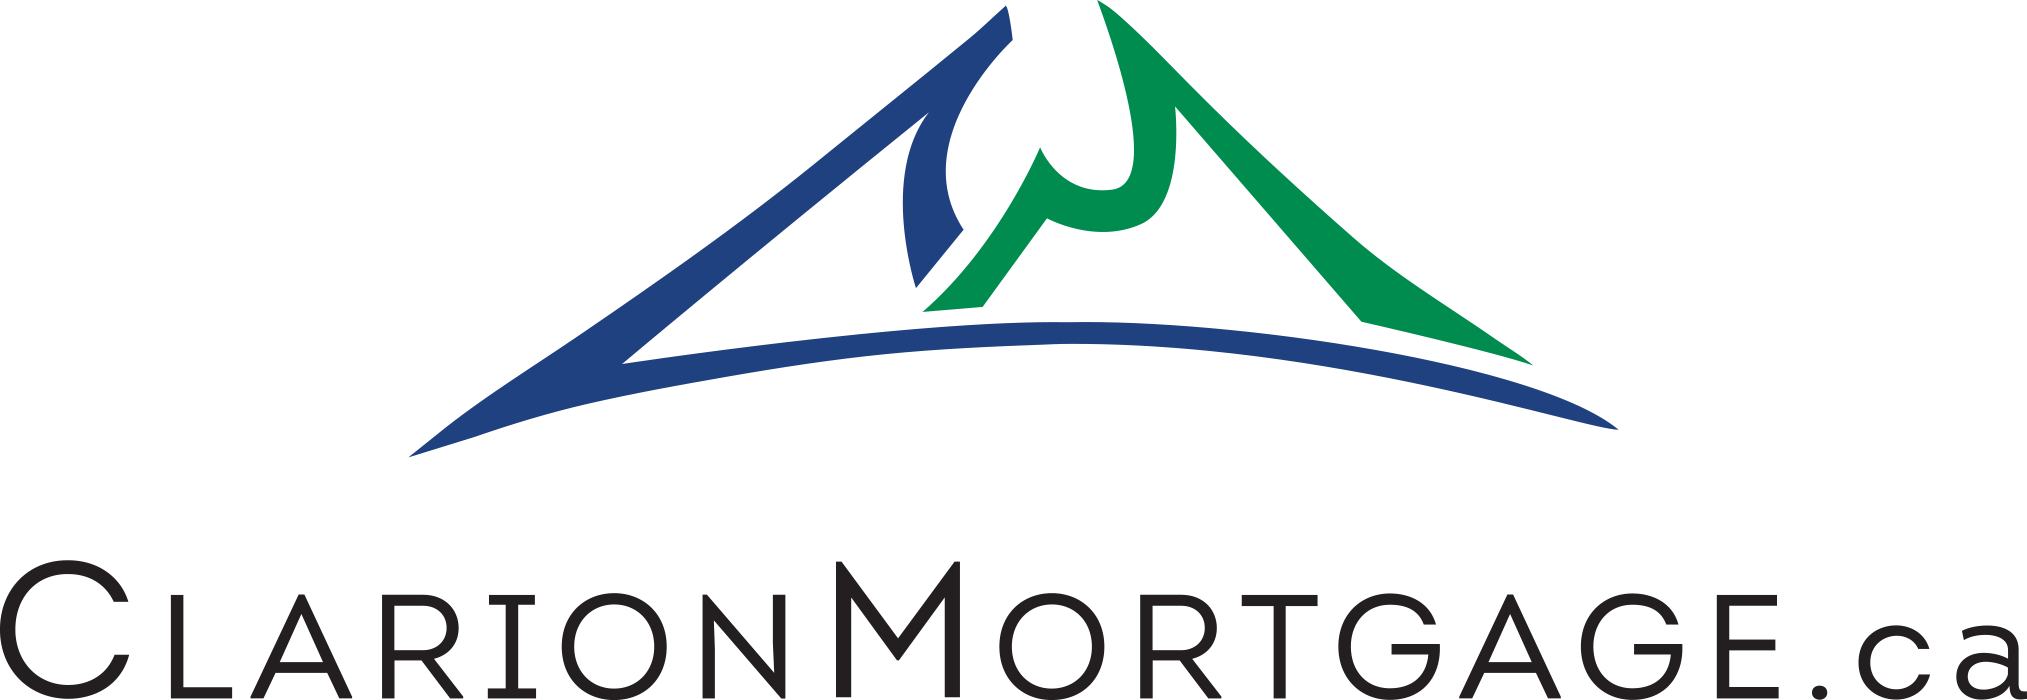 Clarion Mortgage